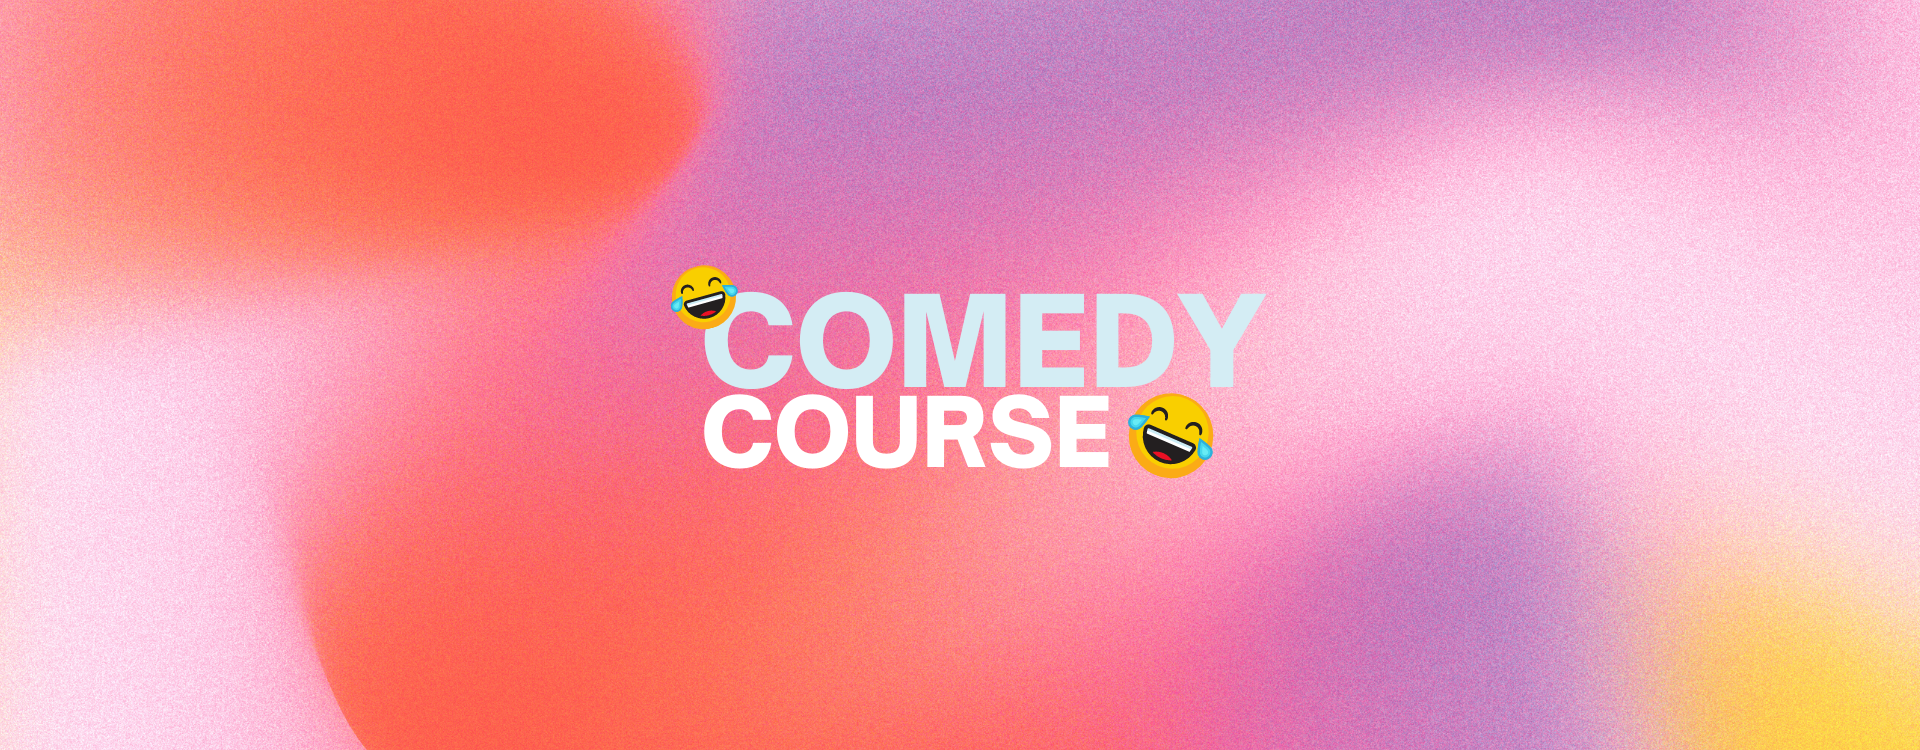 Comedy course Featured image